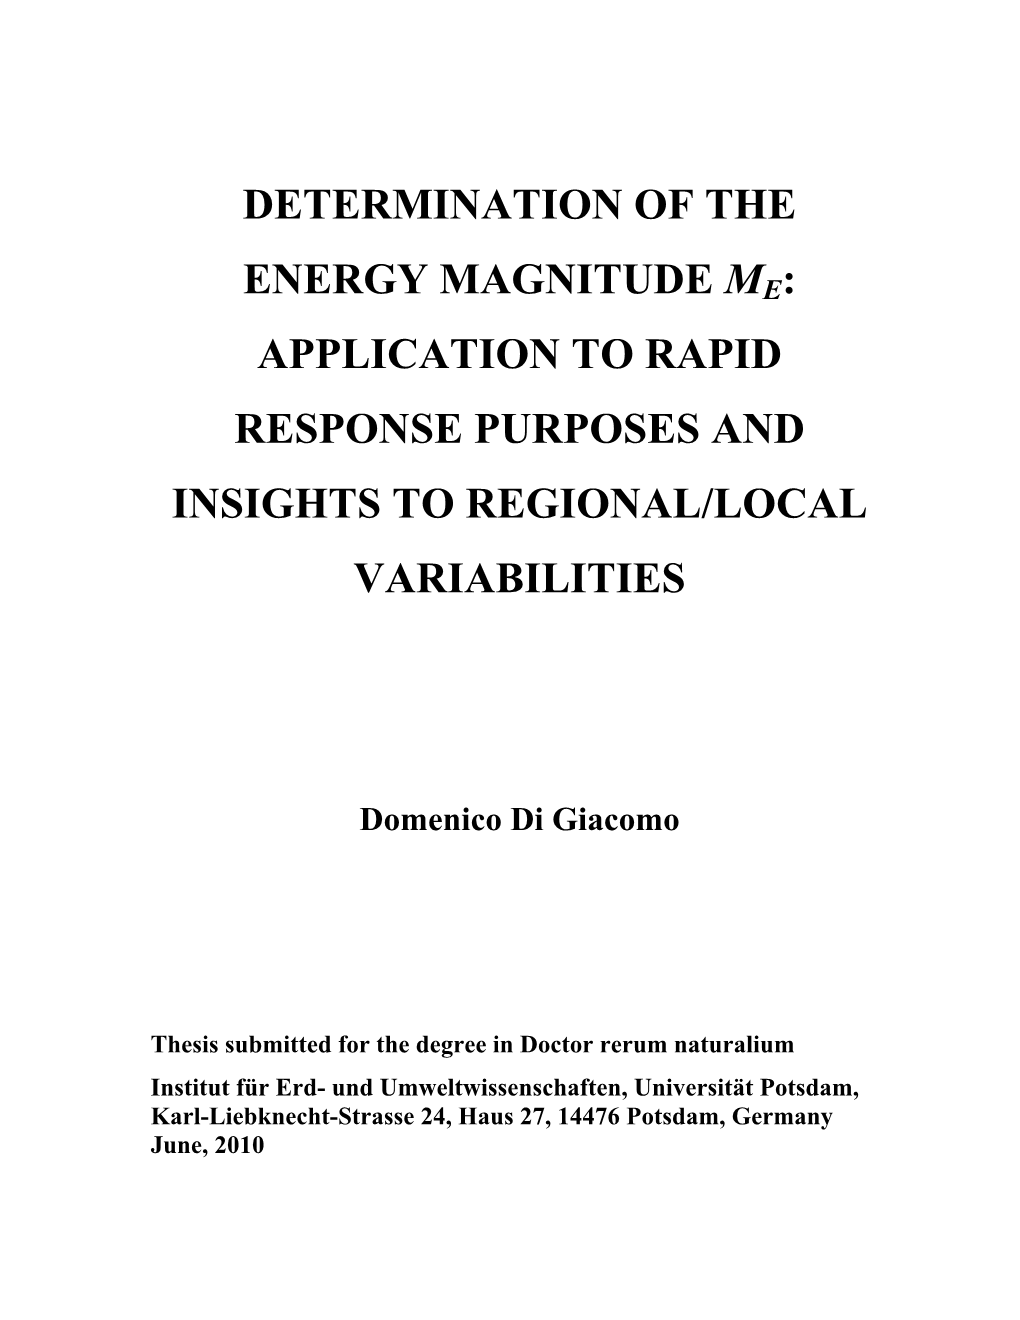 Determination of the Energy Magnitude ME for Application to Rapid Response Purposes